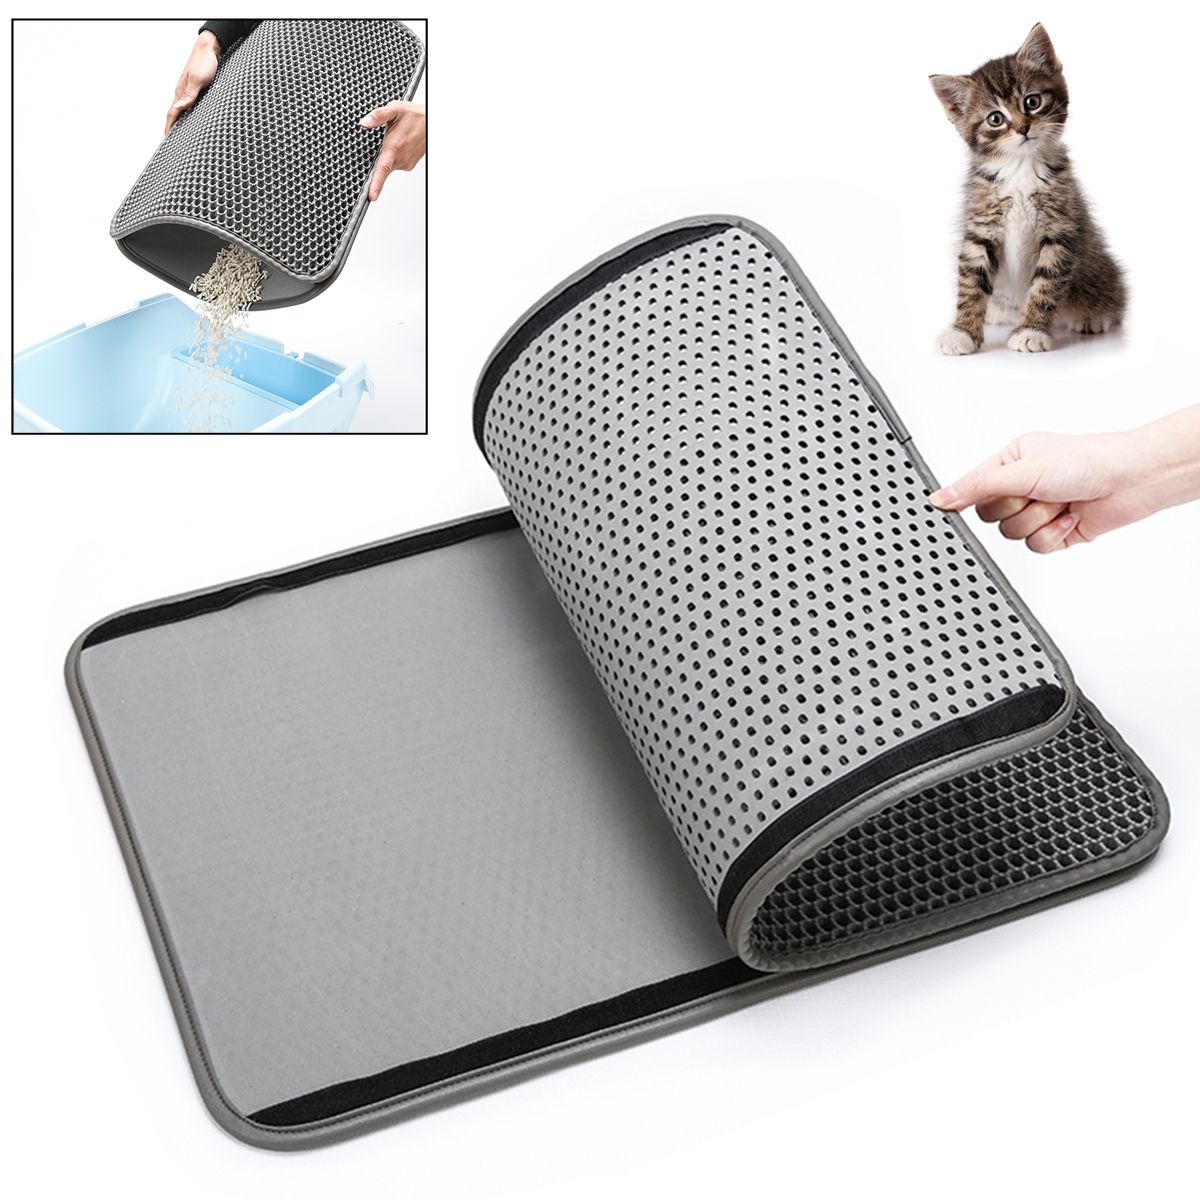 Litiere pour chat Mat Double Layer Pad Large Flexible Trapping pour Box Pan